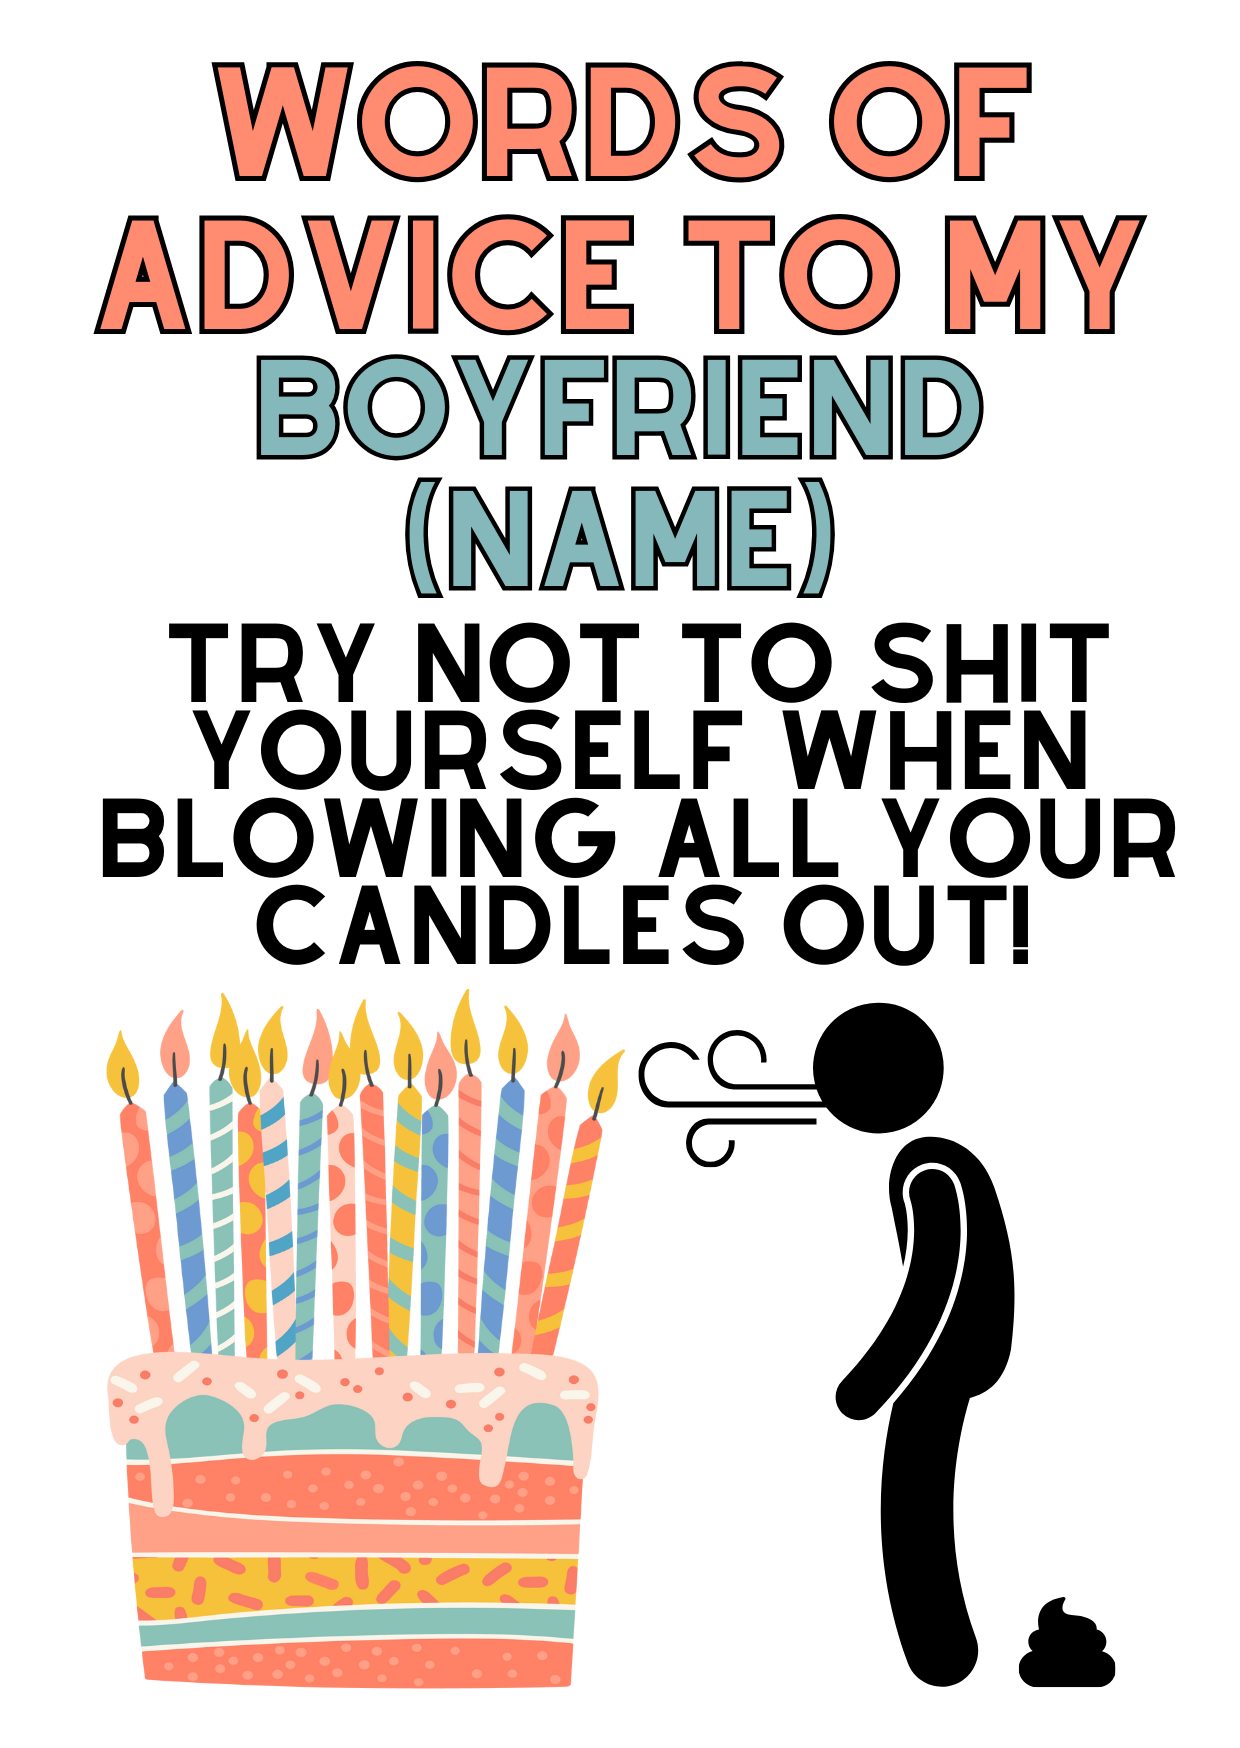 Funny and Personalised Birthday Card for your Legendary Boyfriend